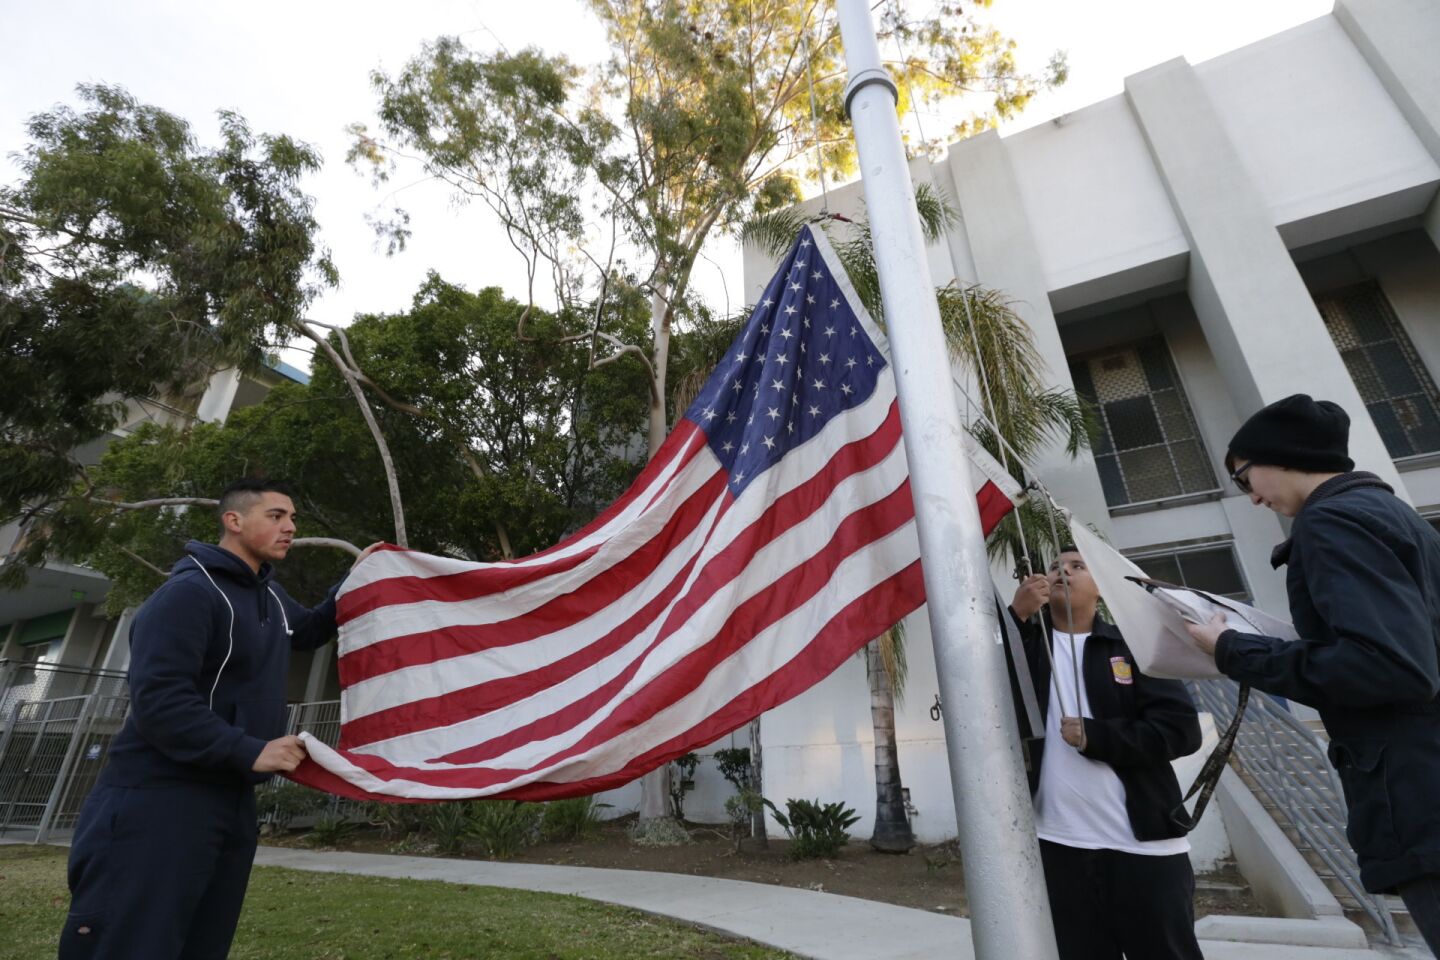 Sunny Vargas, 16, left, Carlos Bello, 16, and Natalie Matossian, 14, raise flags outside Franklin High School as Los Angeles schools reopened on Wednesday.